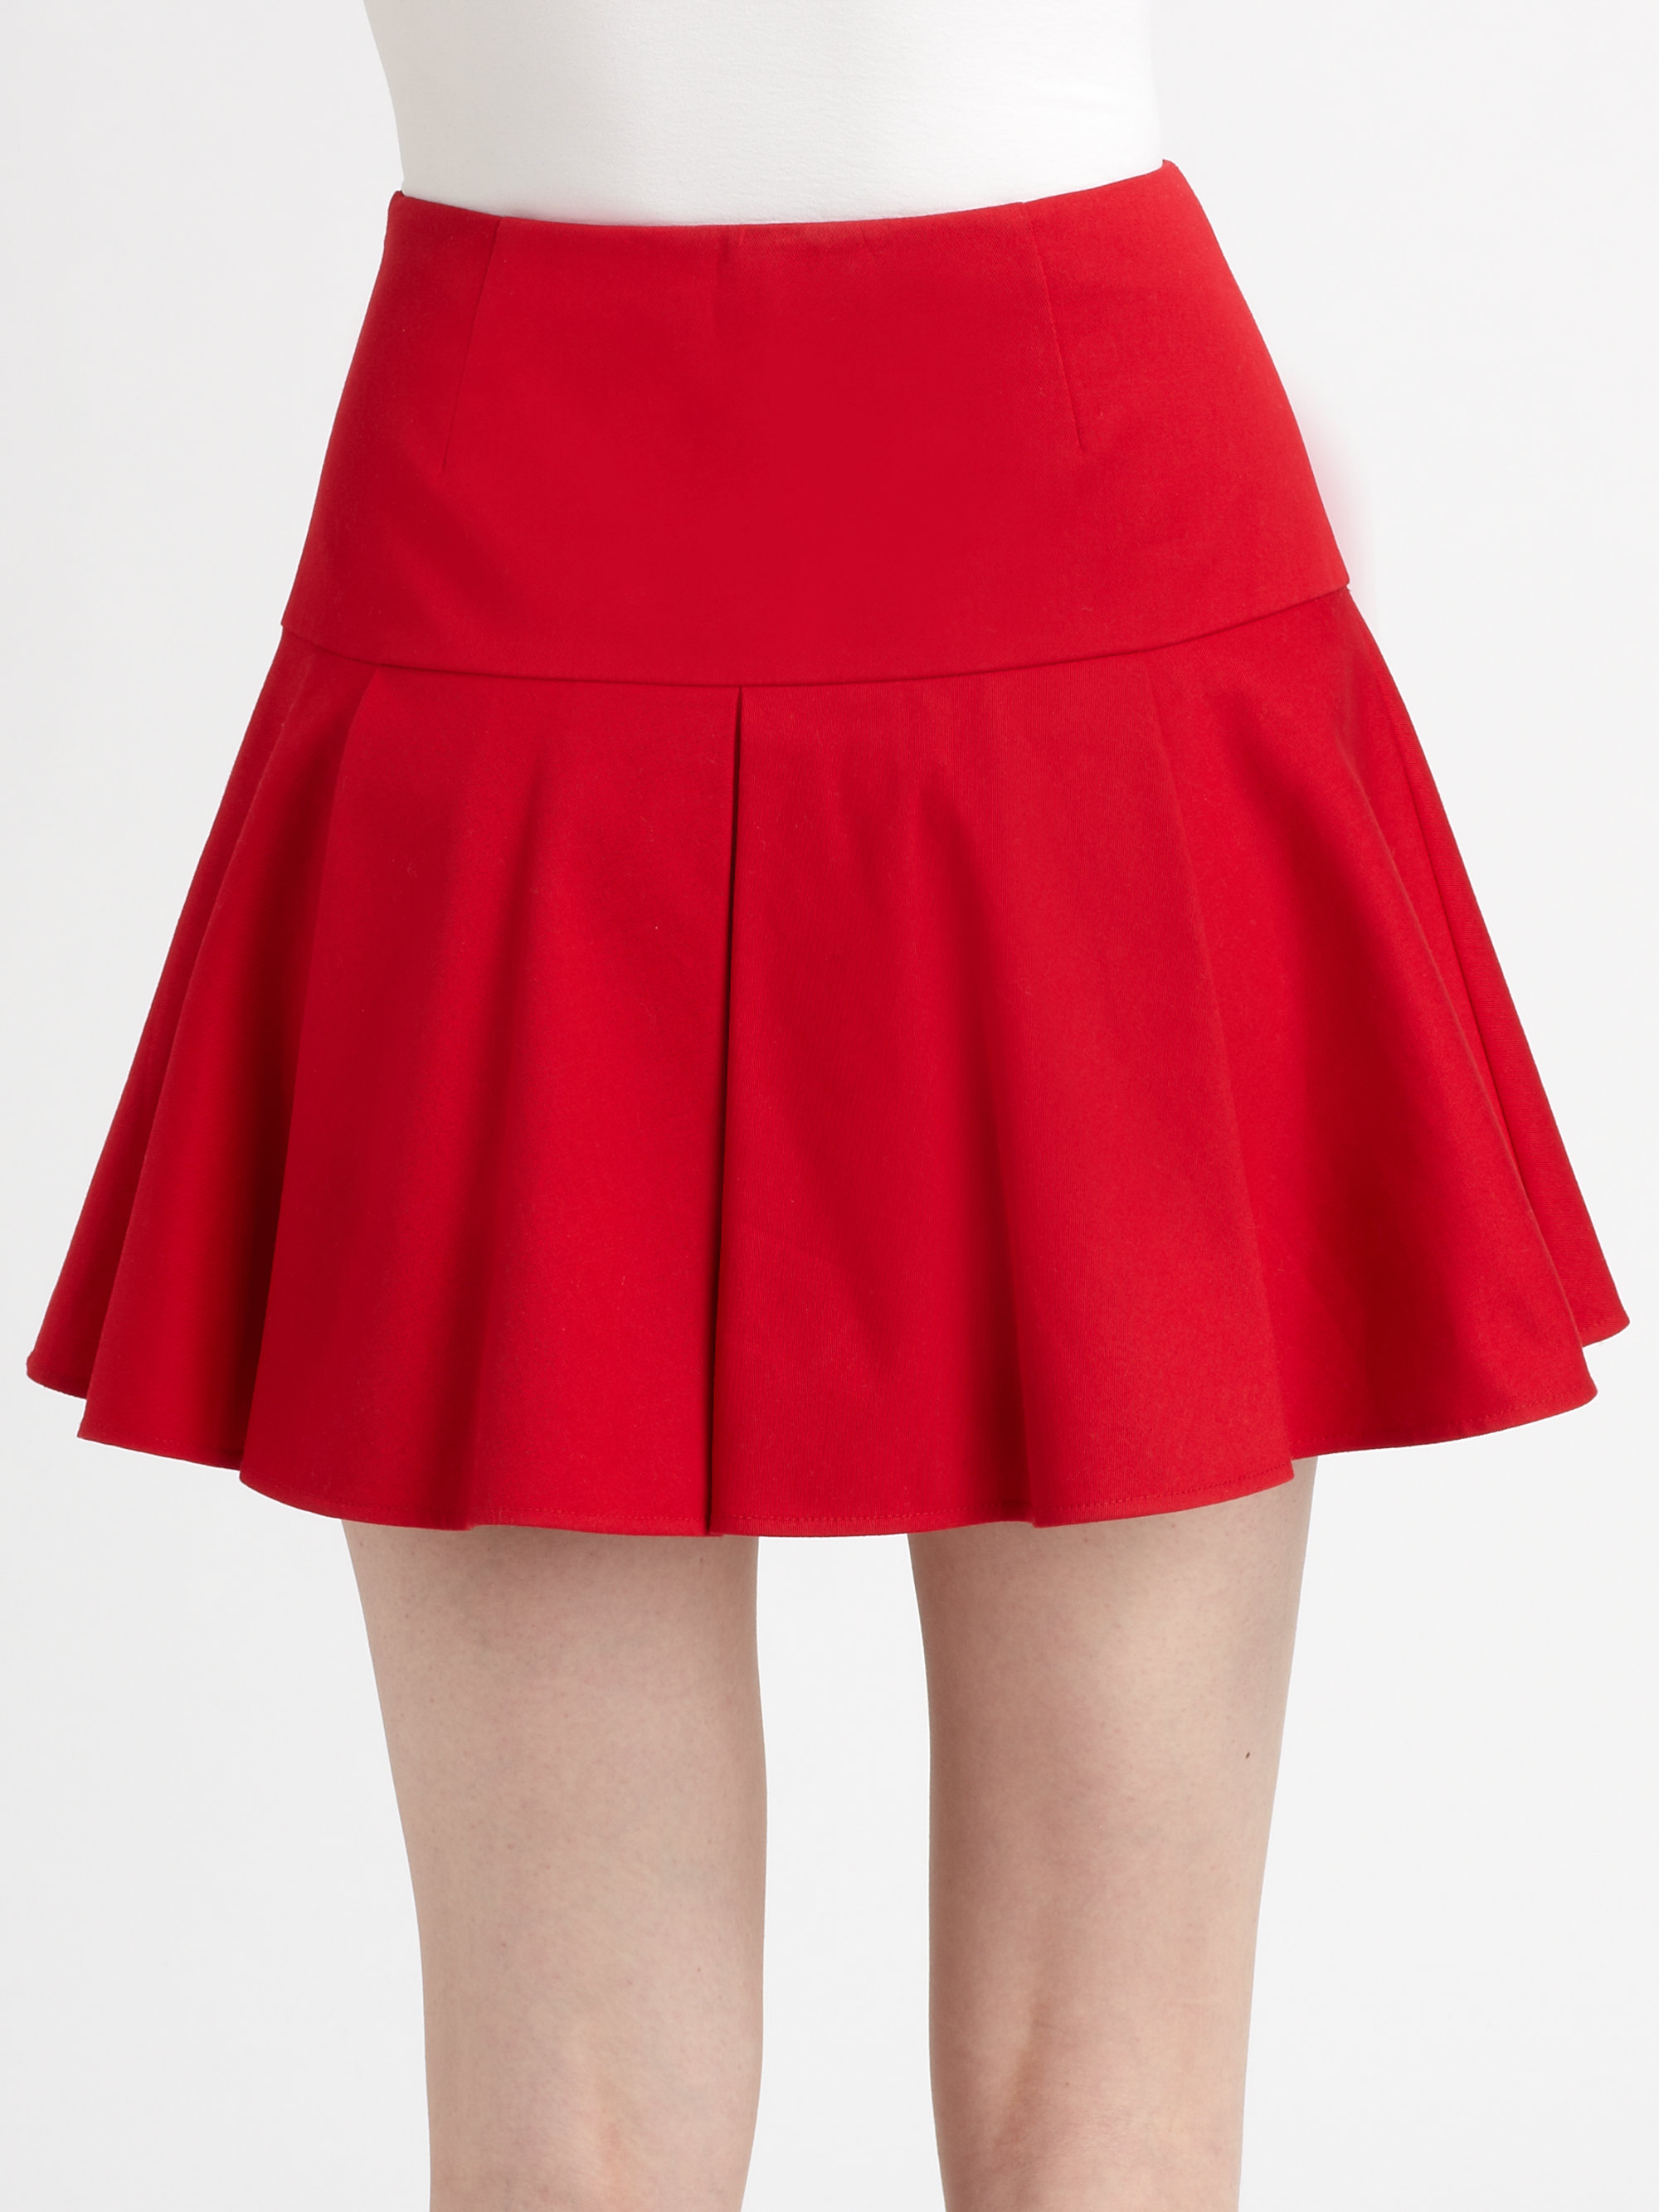 Lyst - Red valentino Mini Skirt in Red